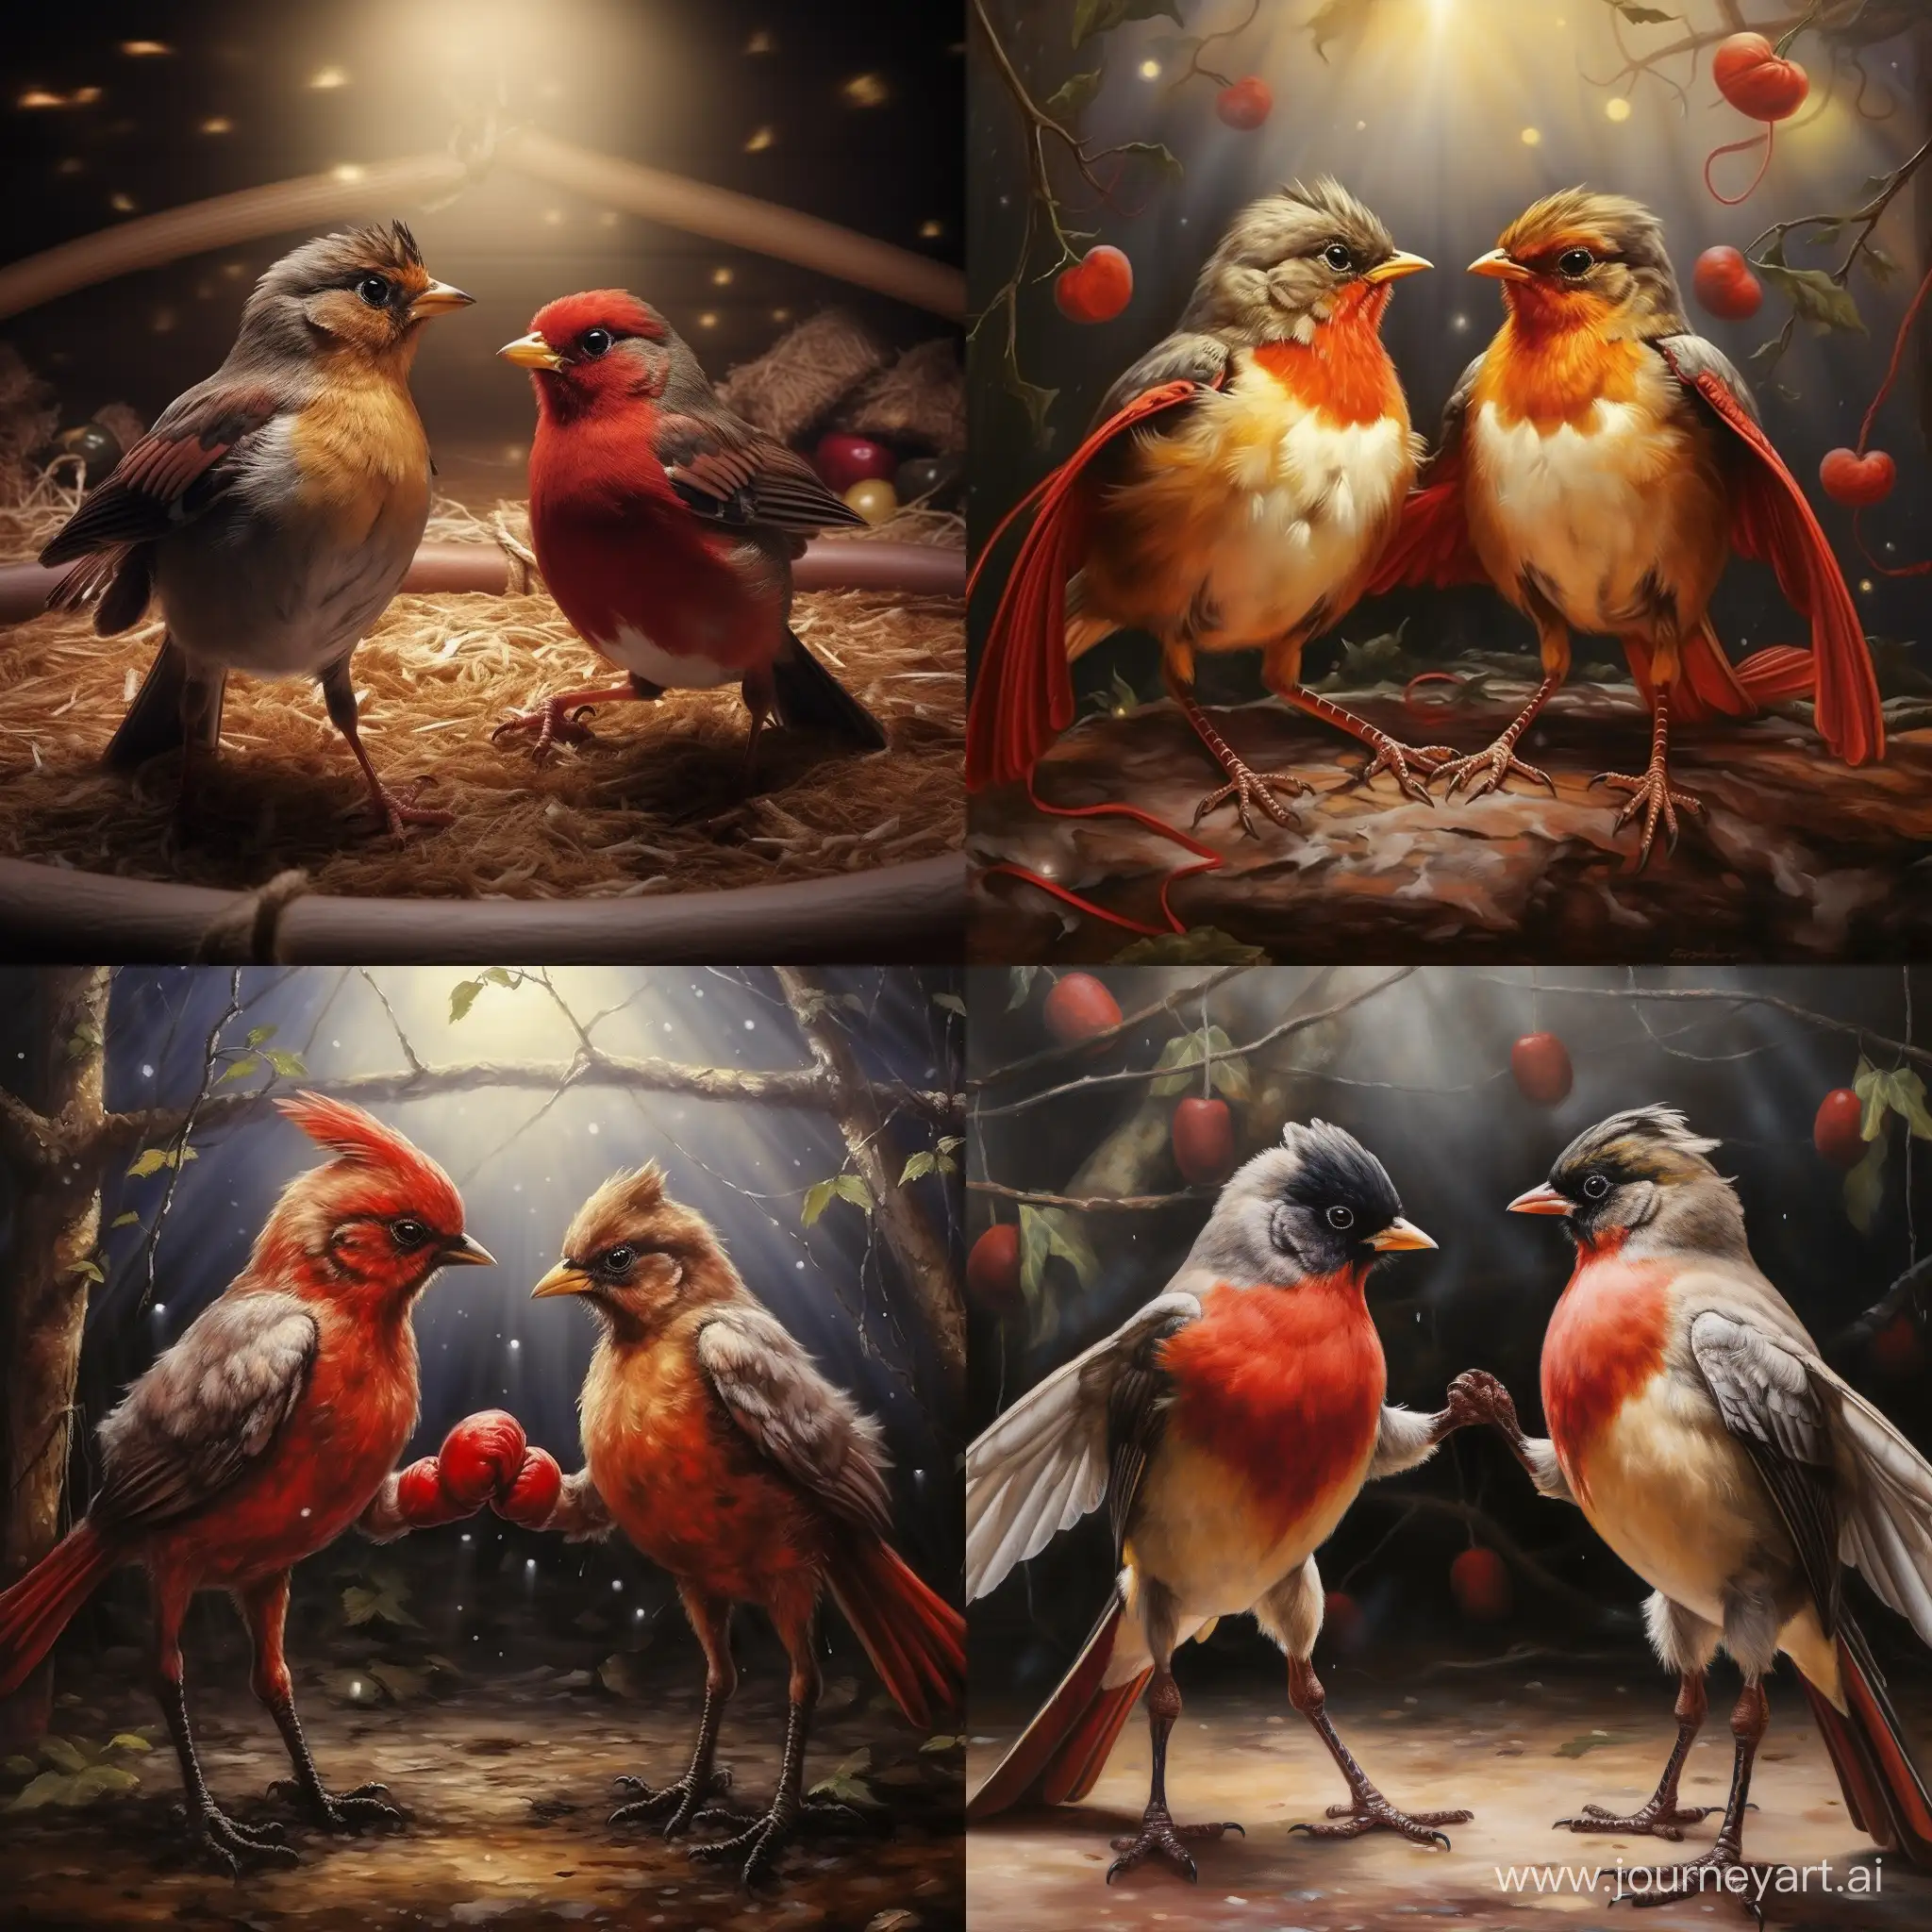 Red robin birds boxing each other in a boxing ring